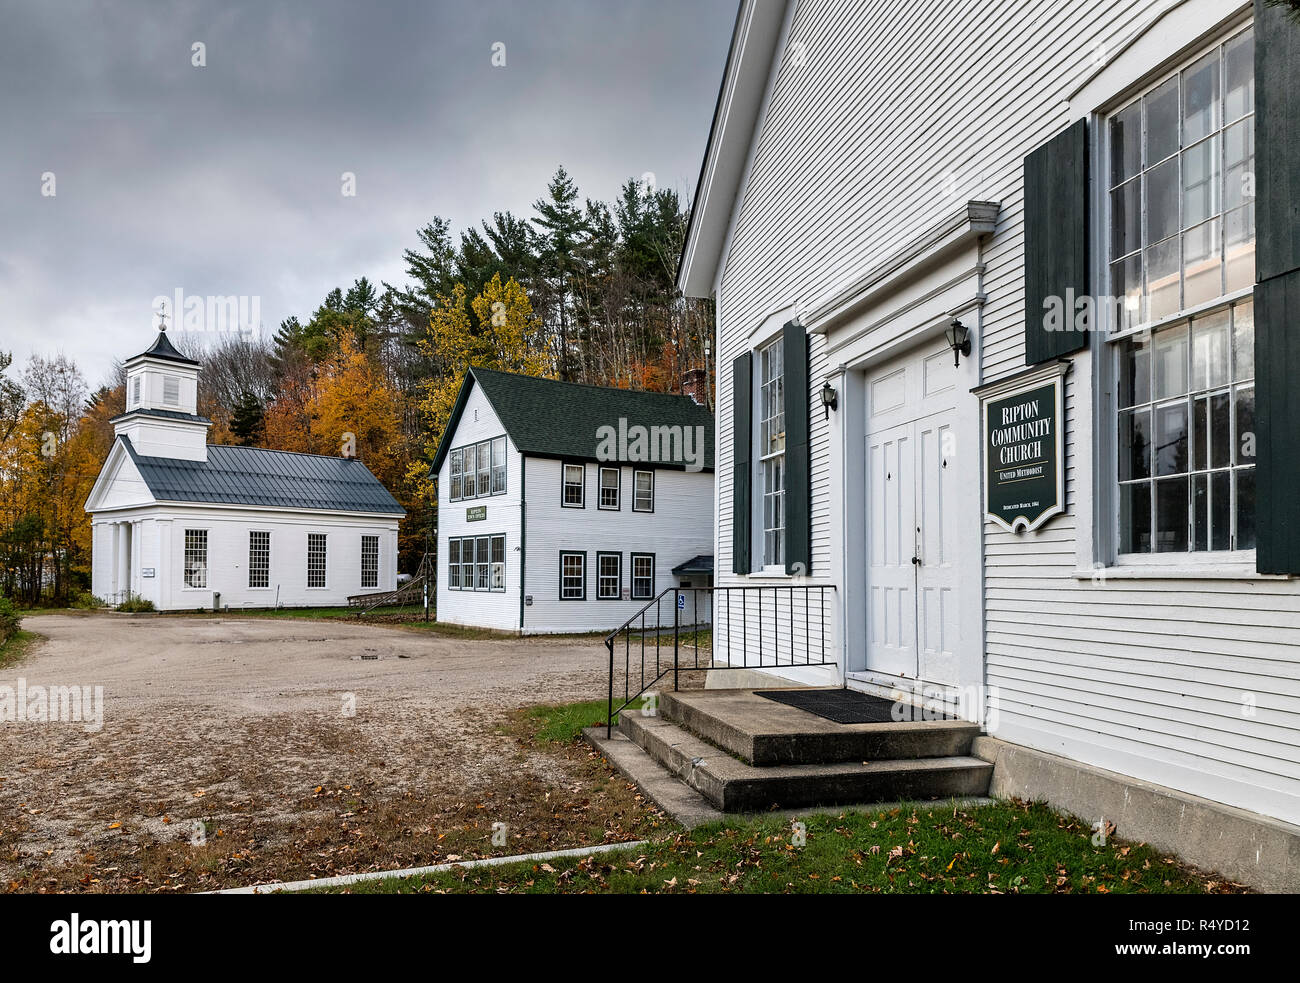 Community buildings in the village of Ripton, Vermont, USA. Stock Photo